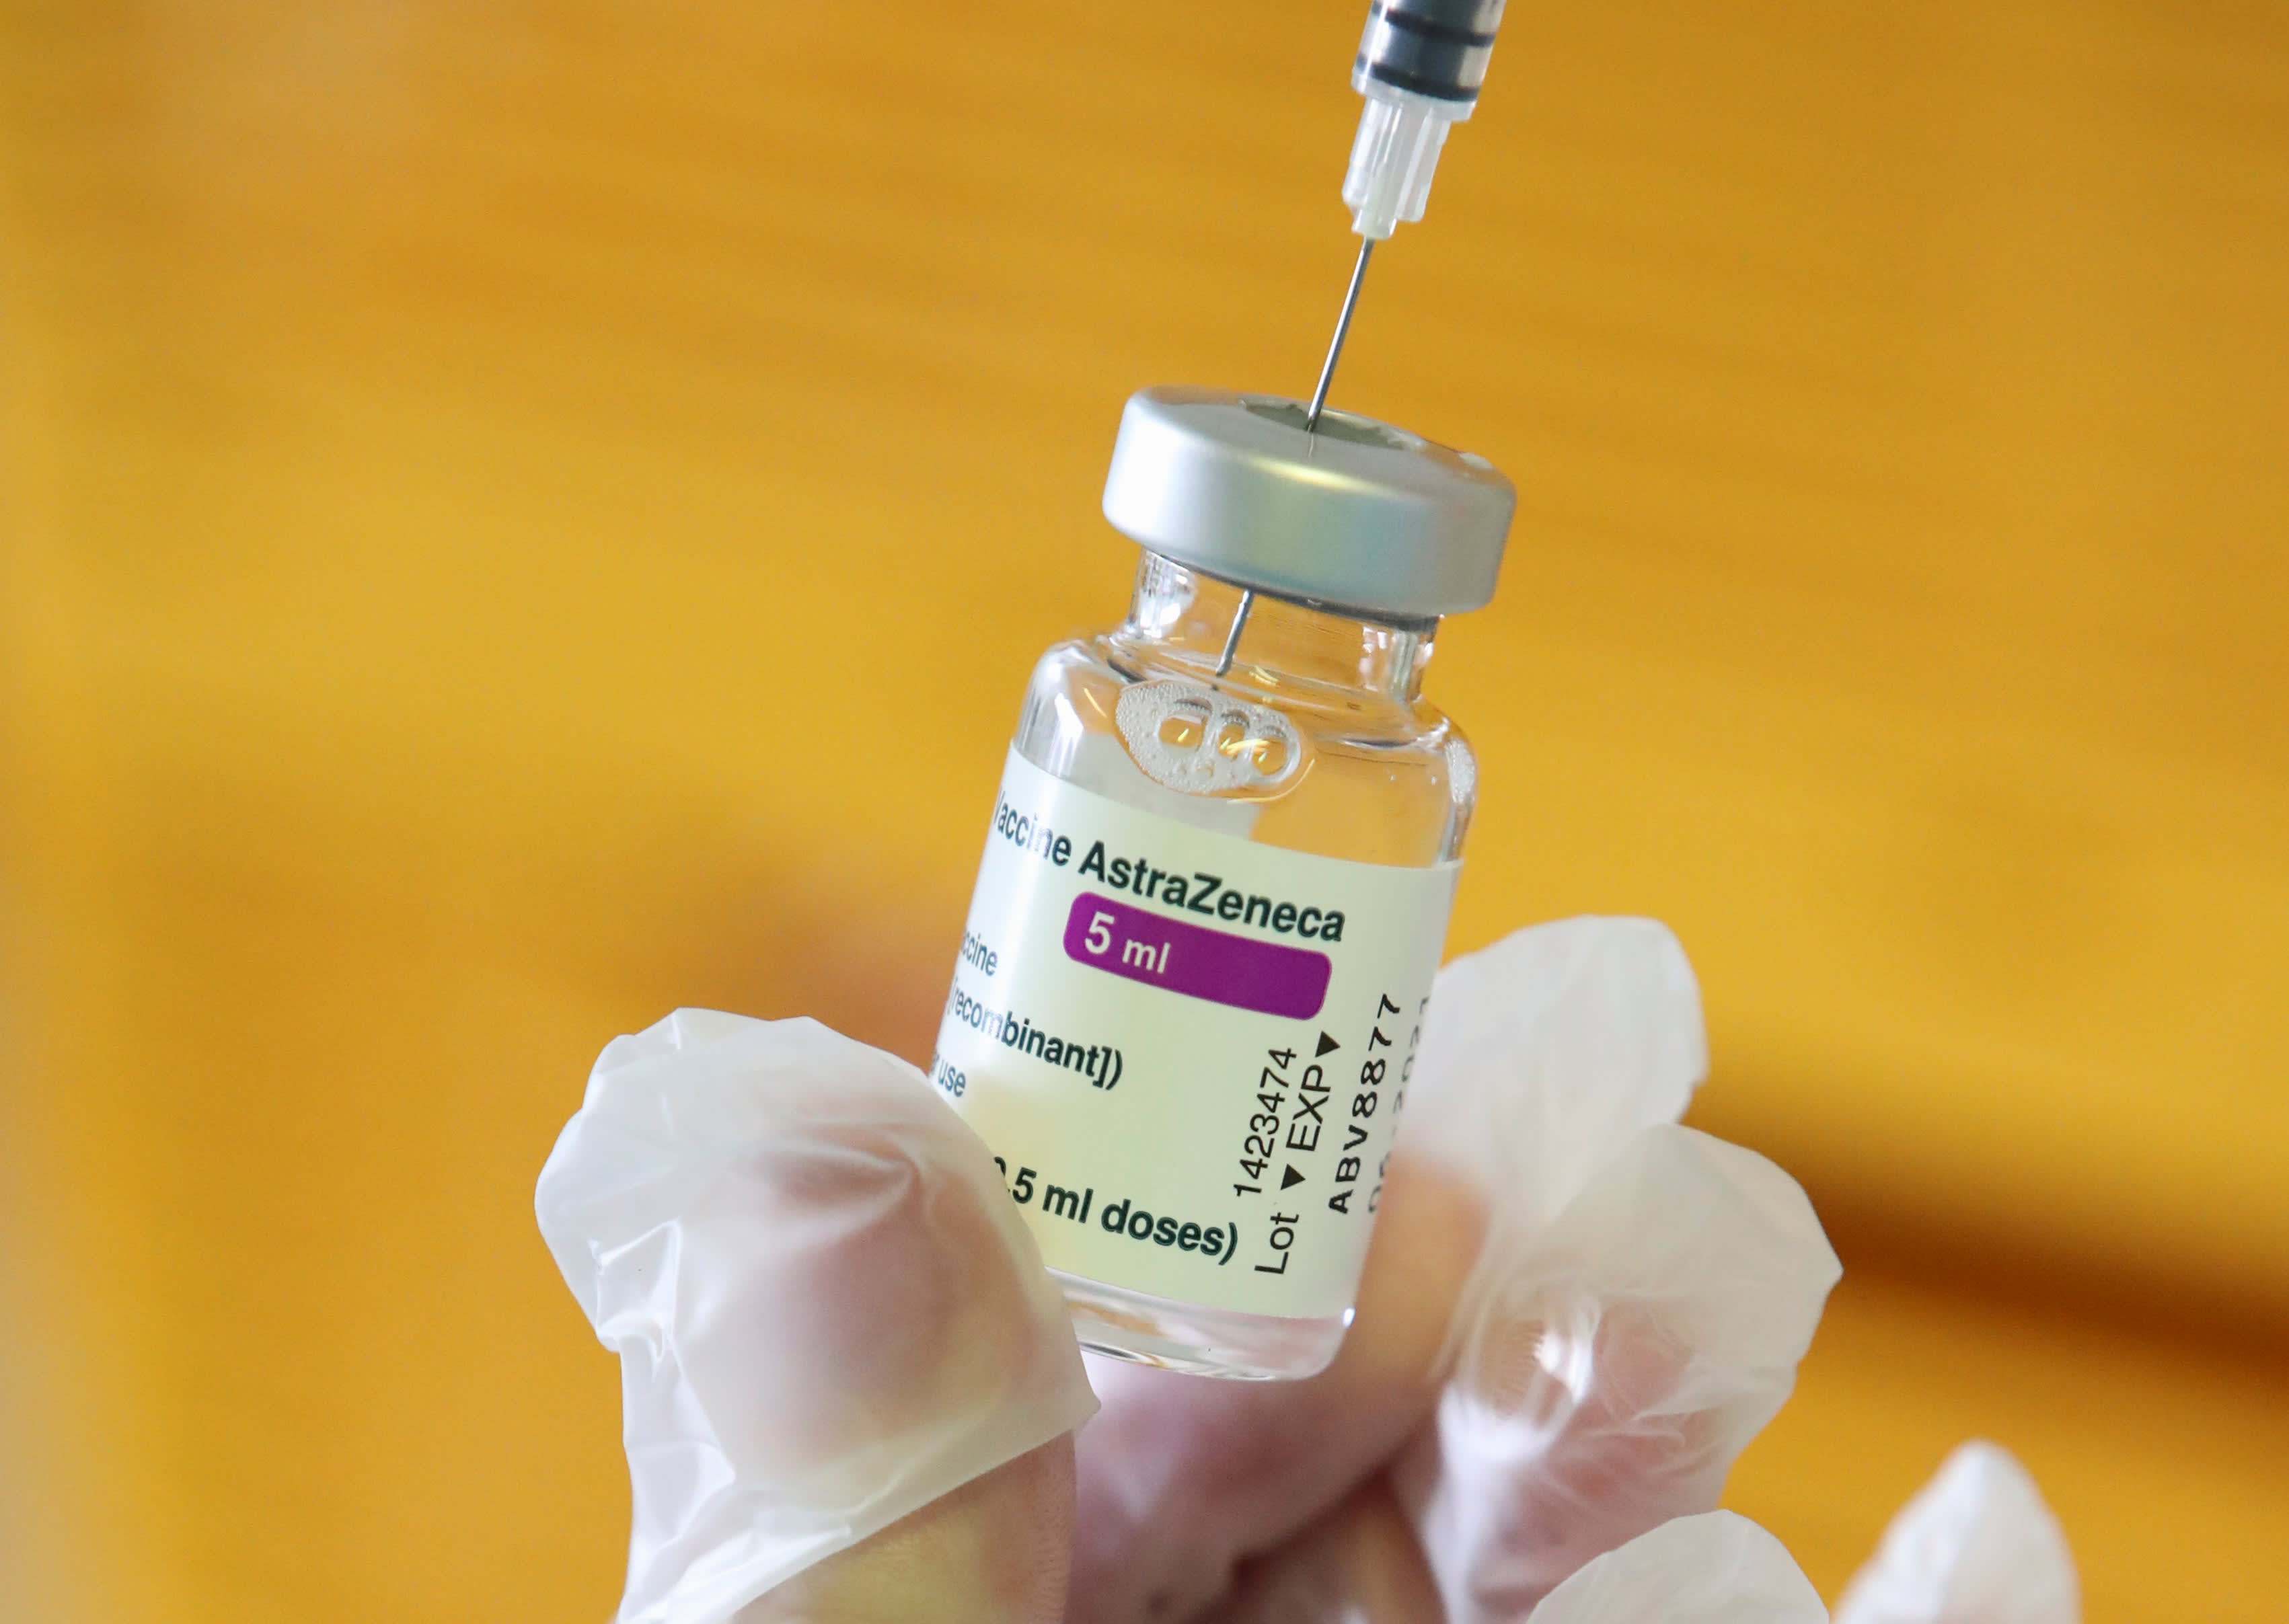 The EU is preparing legal action against AstraZeneca over vaccine delivery problems